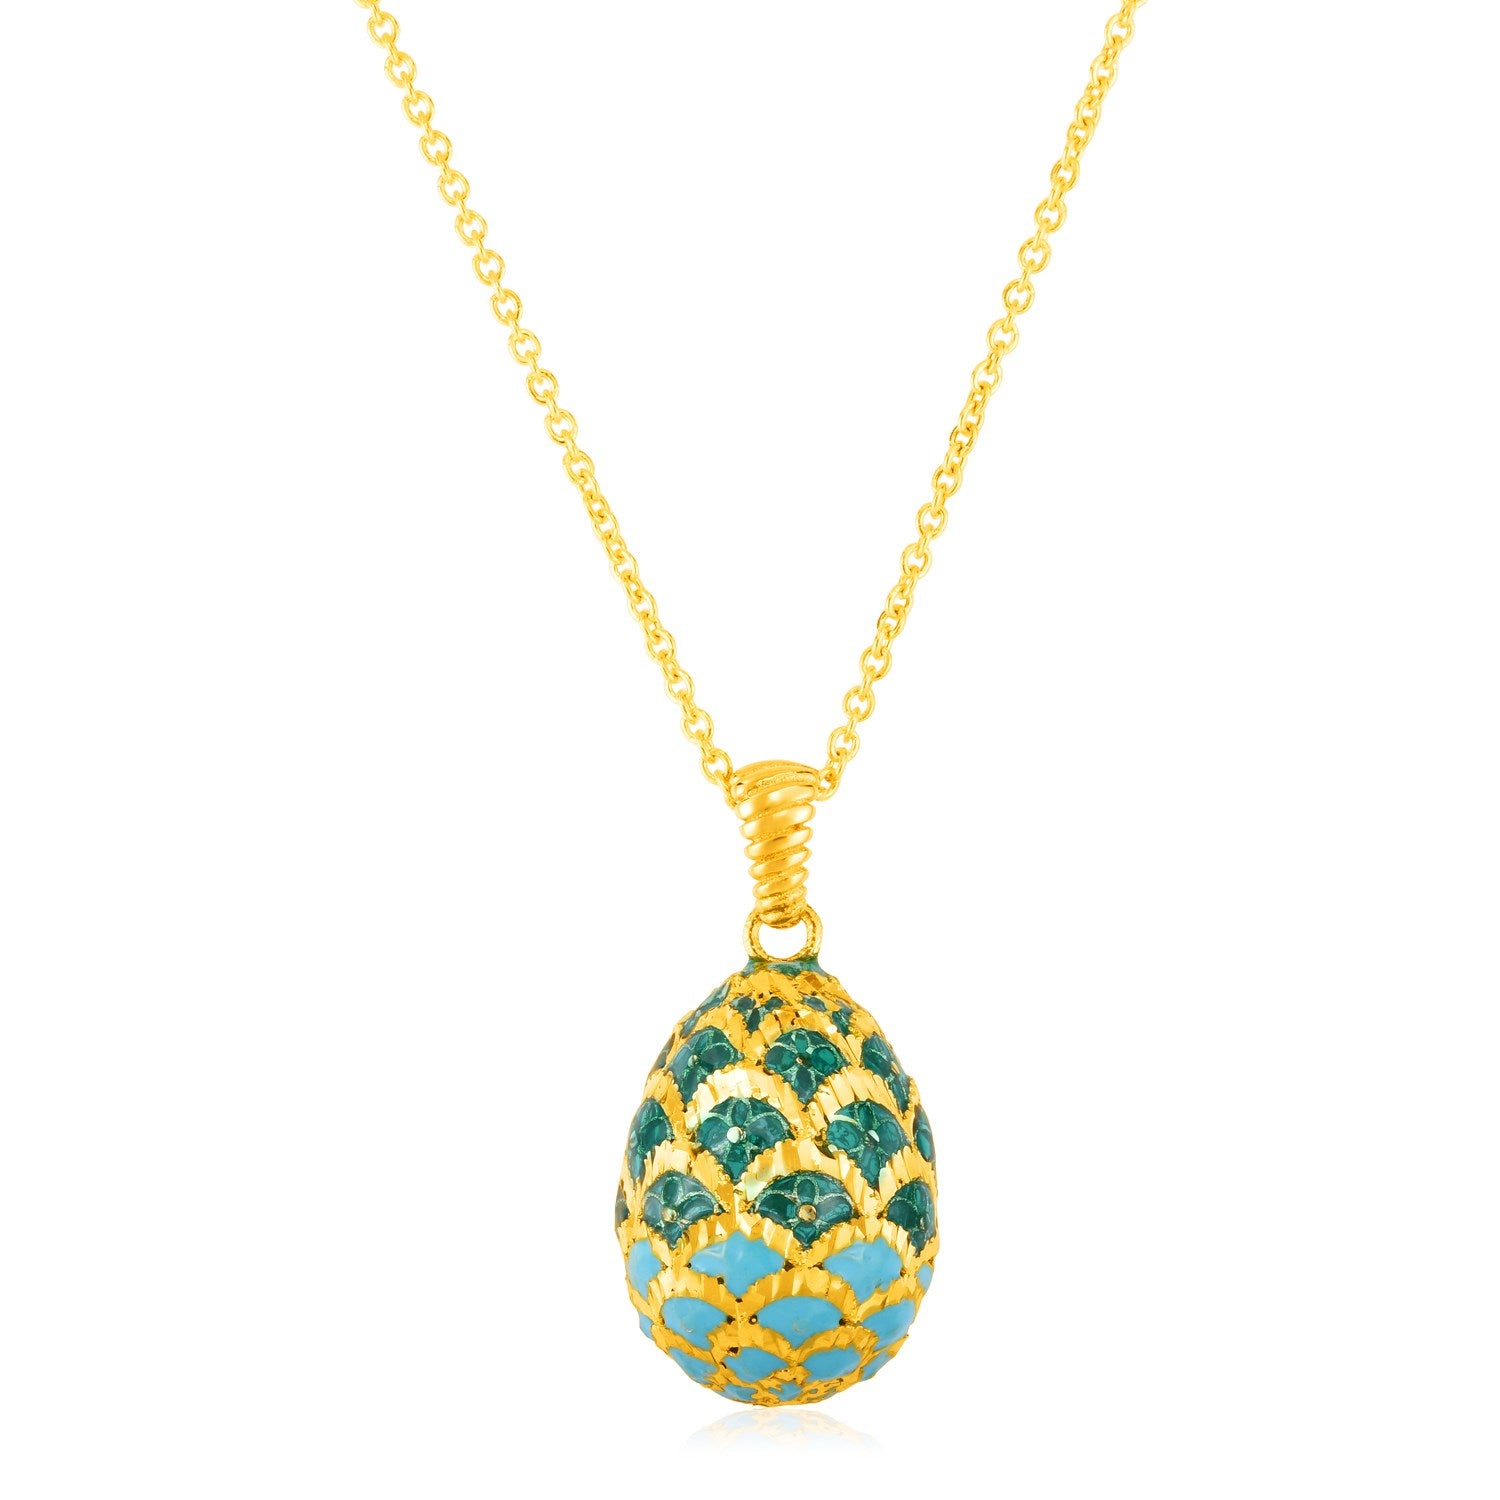 14K Yellow Gold Necklace with Green Enameled Egg